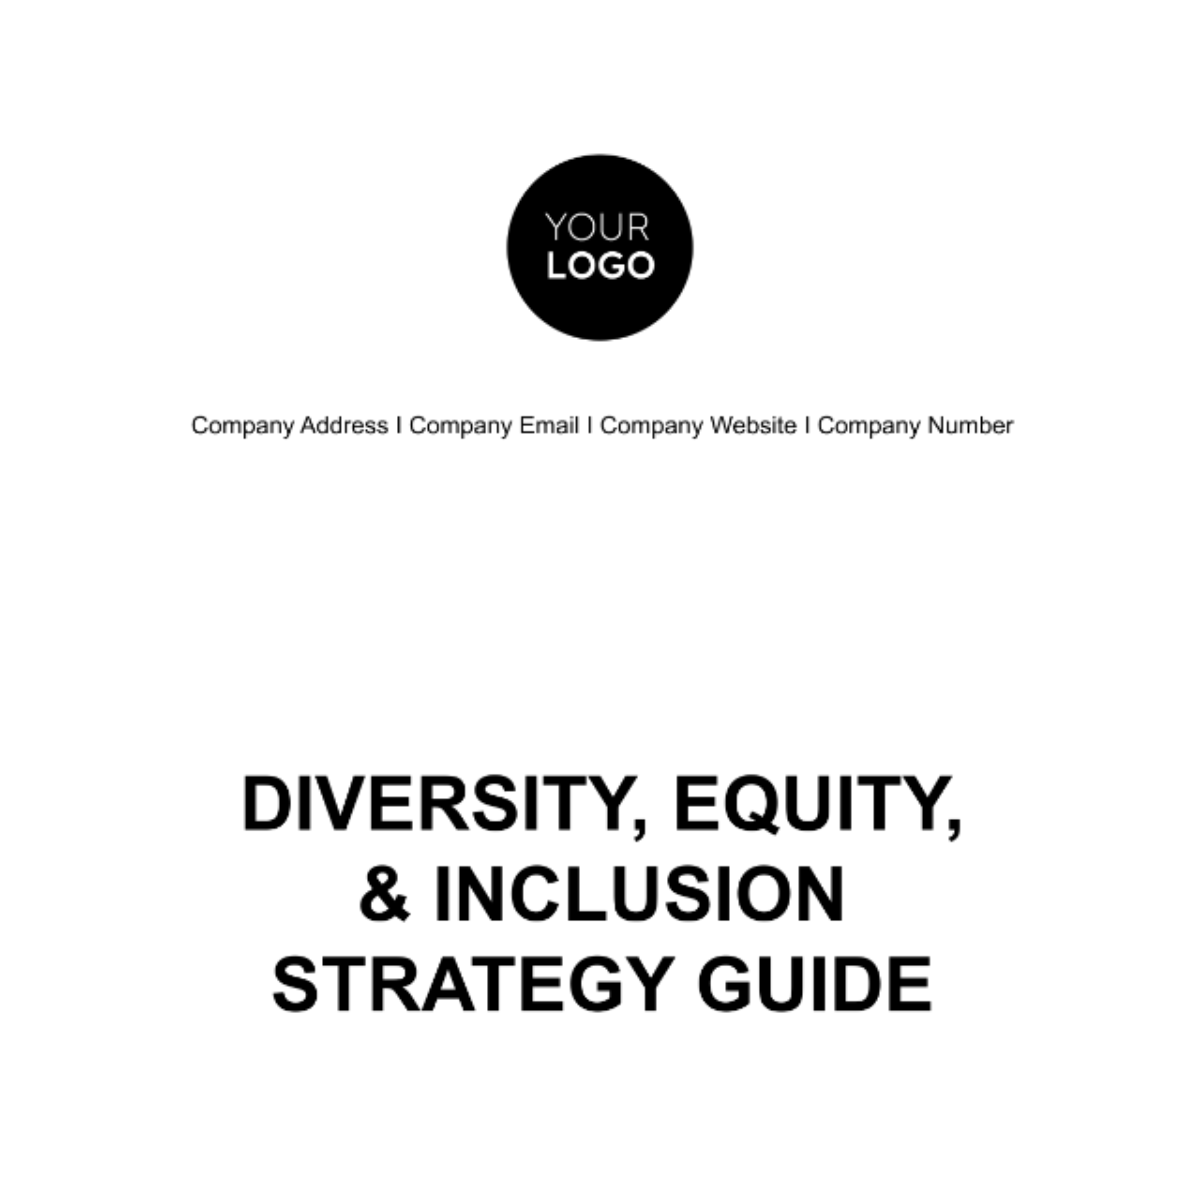 Diversity, Equity, & Inclusion Strategy Guide HR Template